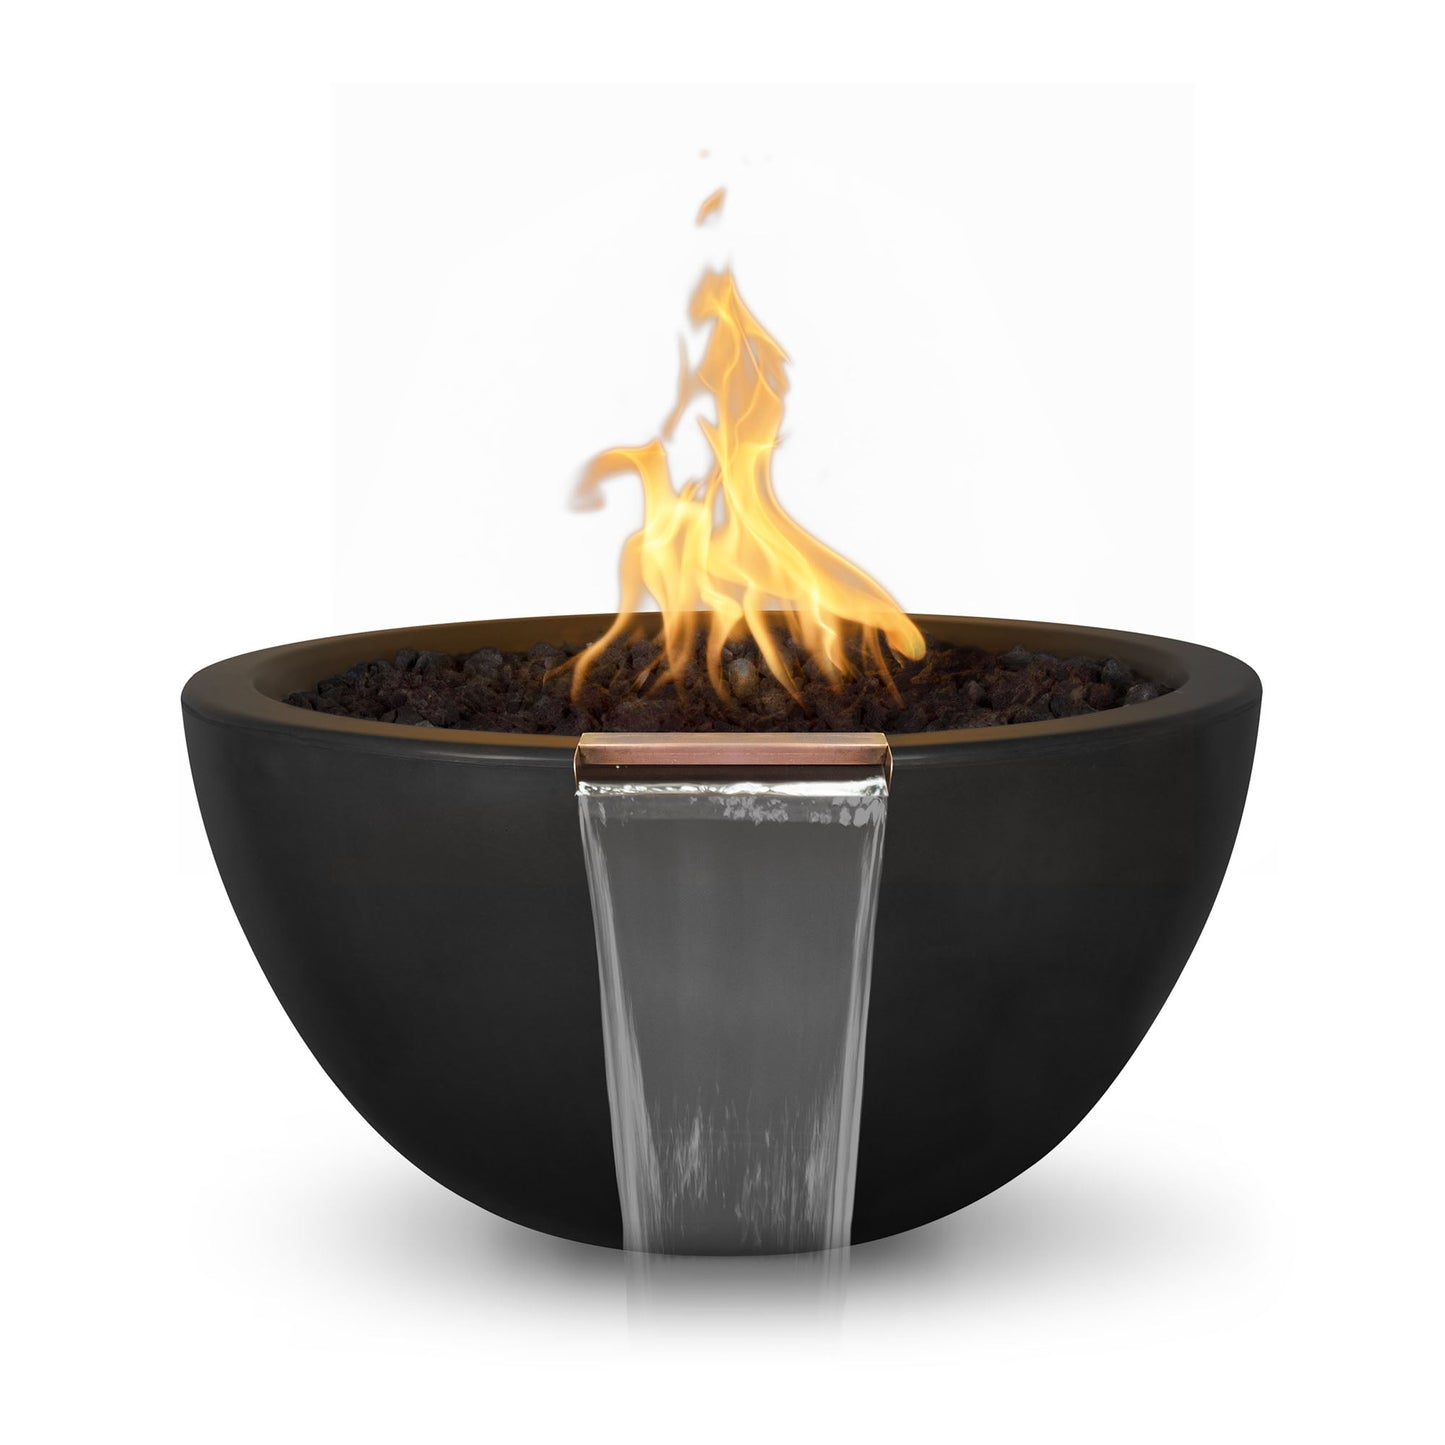 The Outdoor Plus Round Luna 30" Rustic Coffee GFRC Concrete Natural Gas Fire & Water Bowl with Match Lit with Flame Sense Ignition